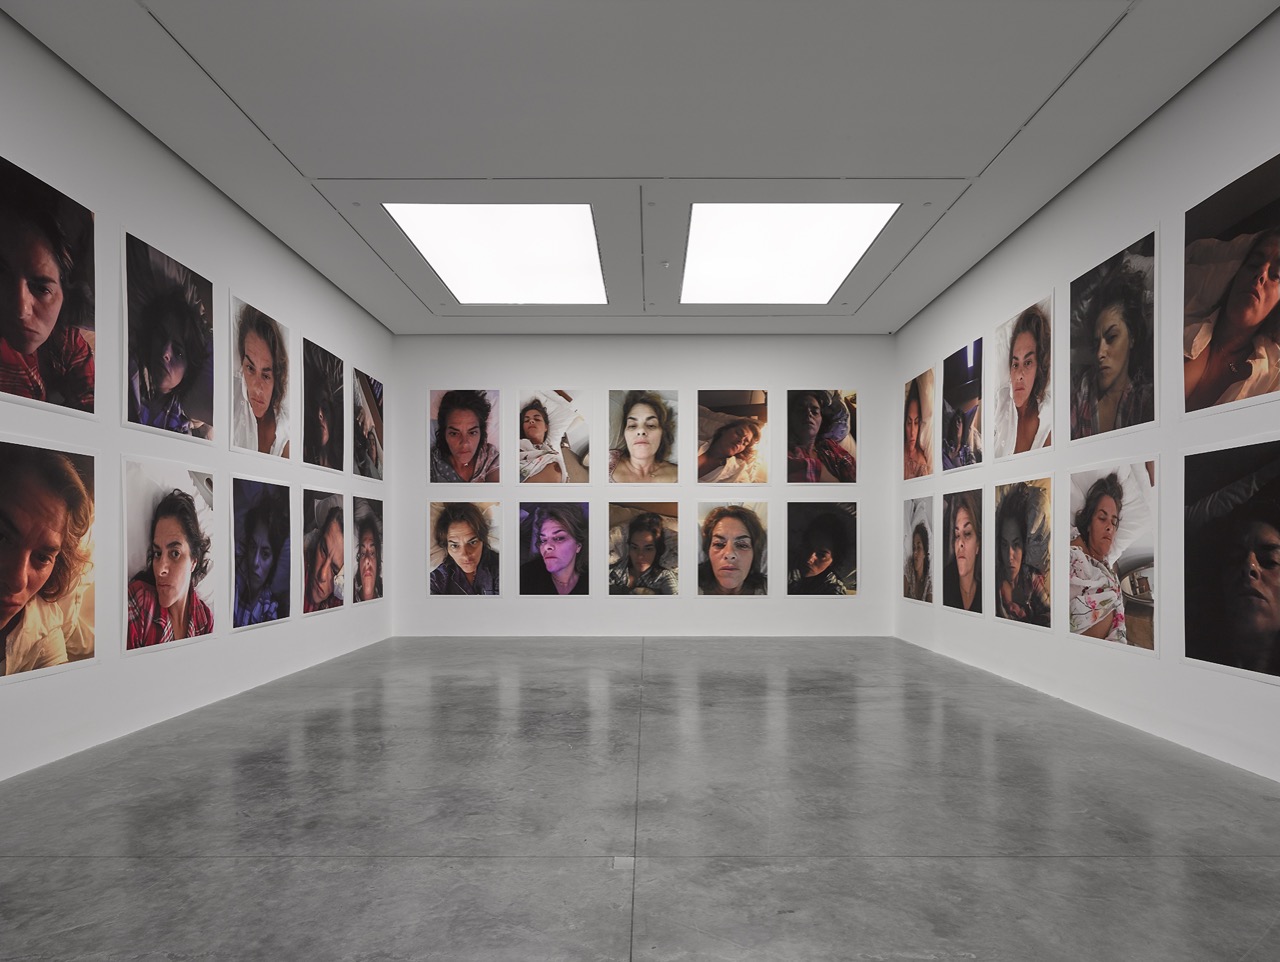 Tracey Emin, White Cube, art, gallery, museum, artist, a fortnight of tears, british, london